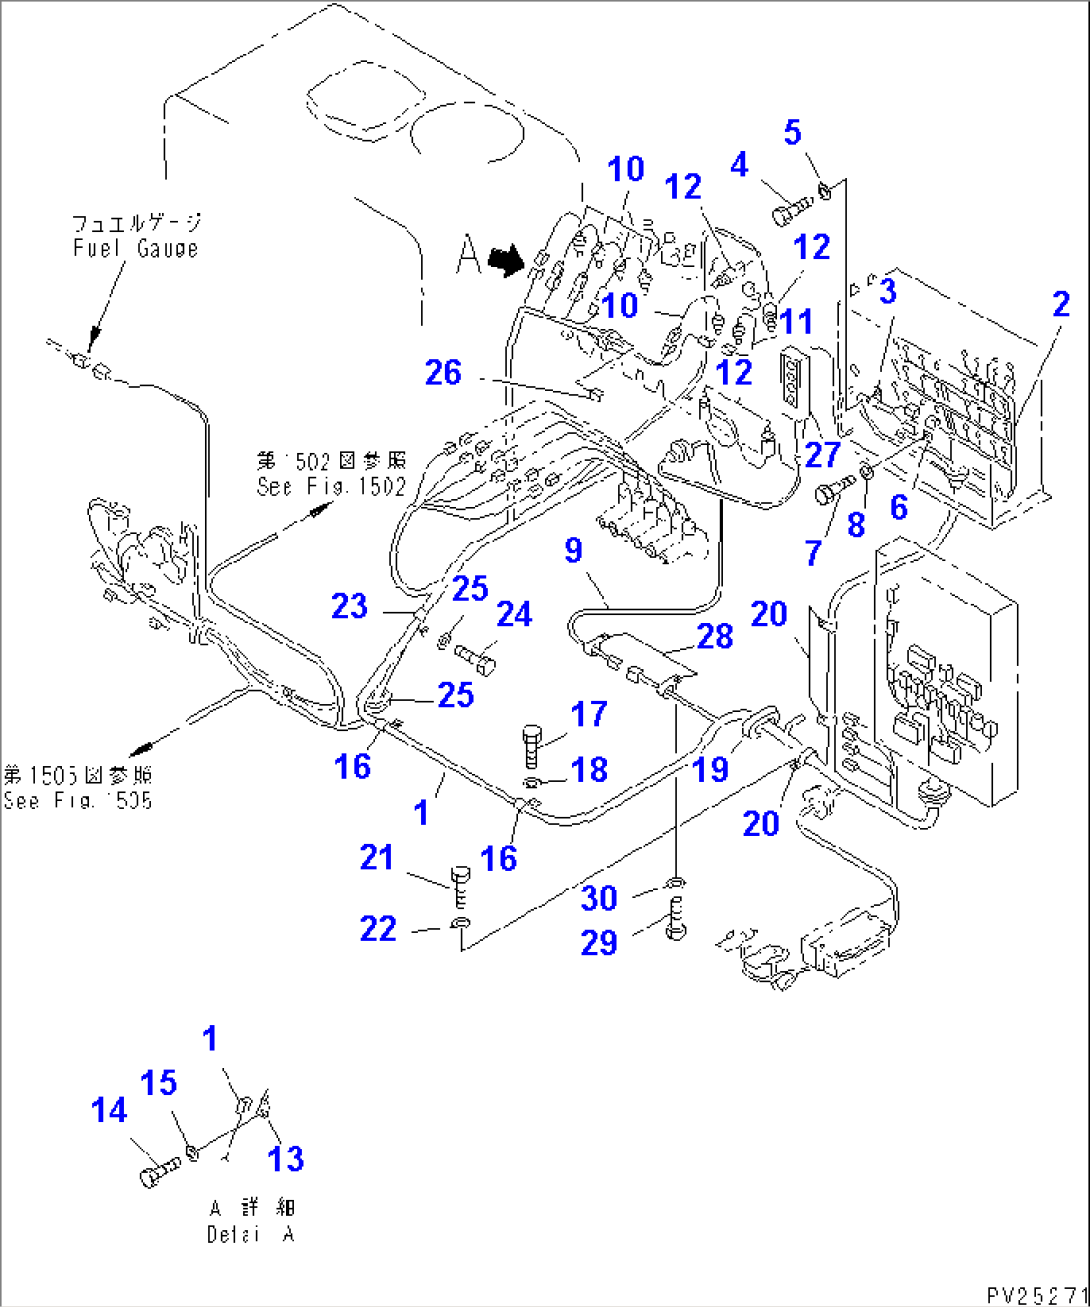 ELECTRICAL SYSTEM (1/9) (MAIN HARNESS) (1/2)